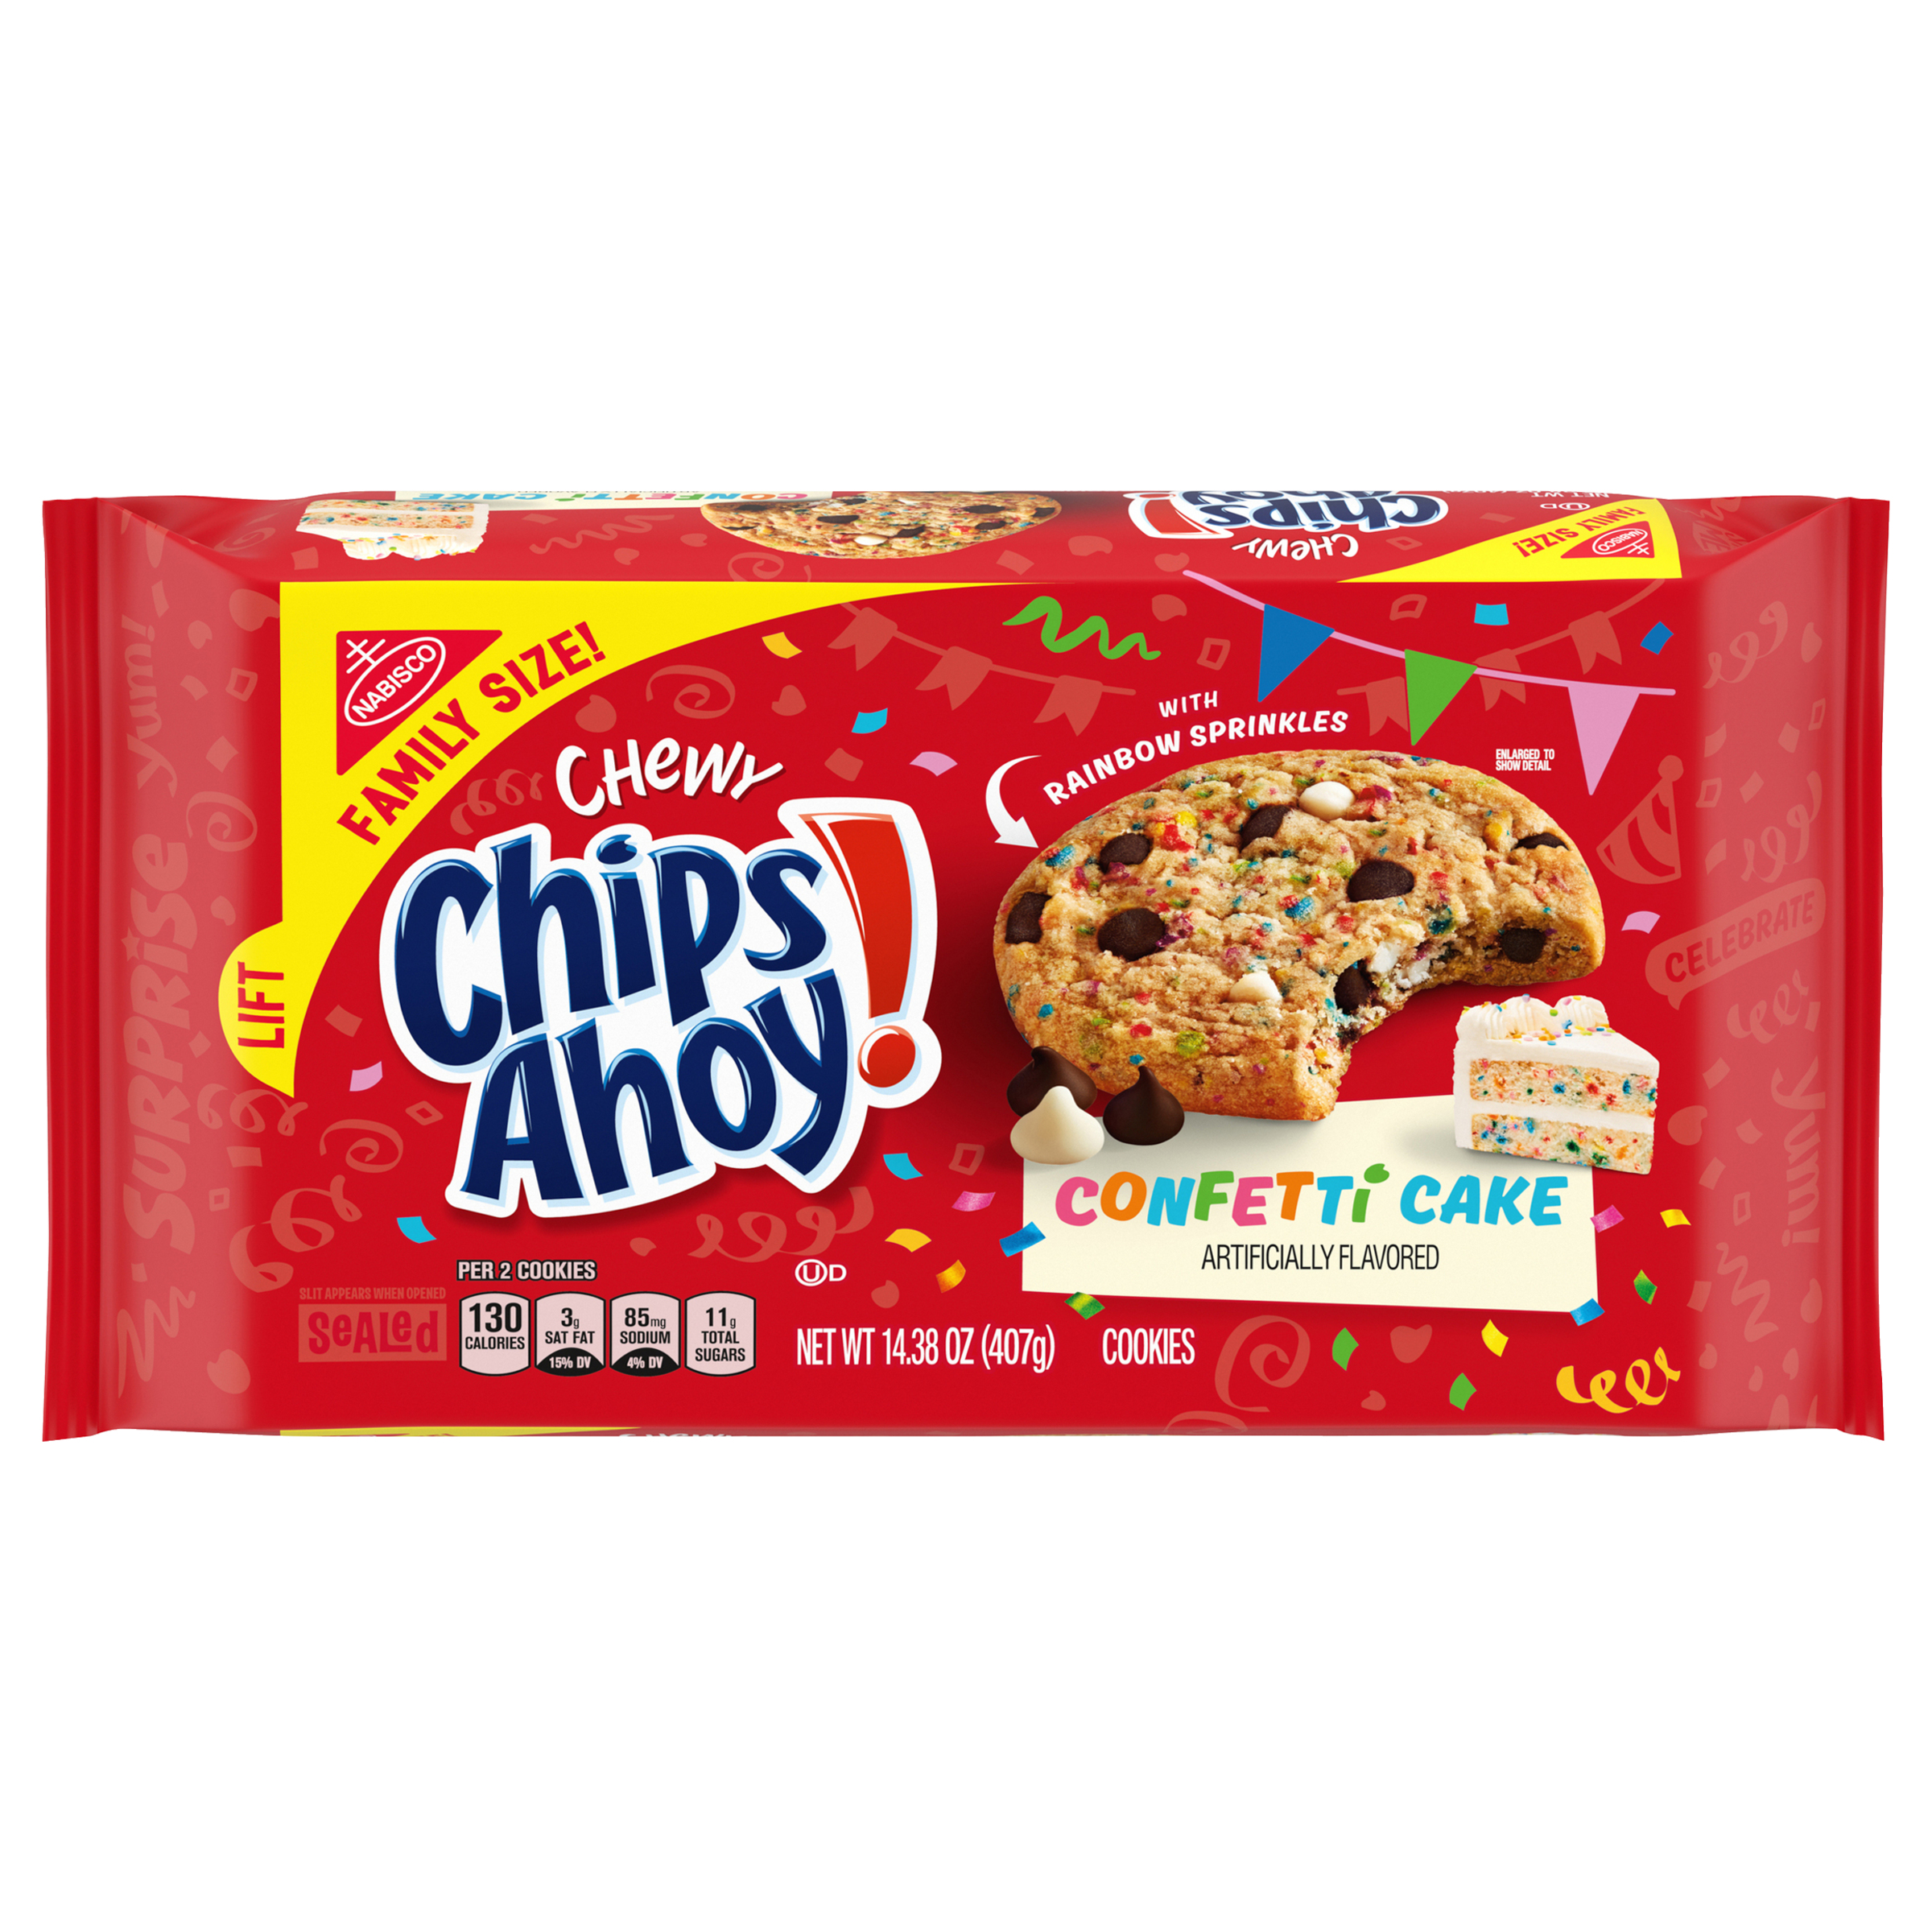 CHIPS AHOY! Chewy Cookies 0.9 LB